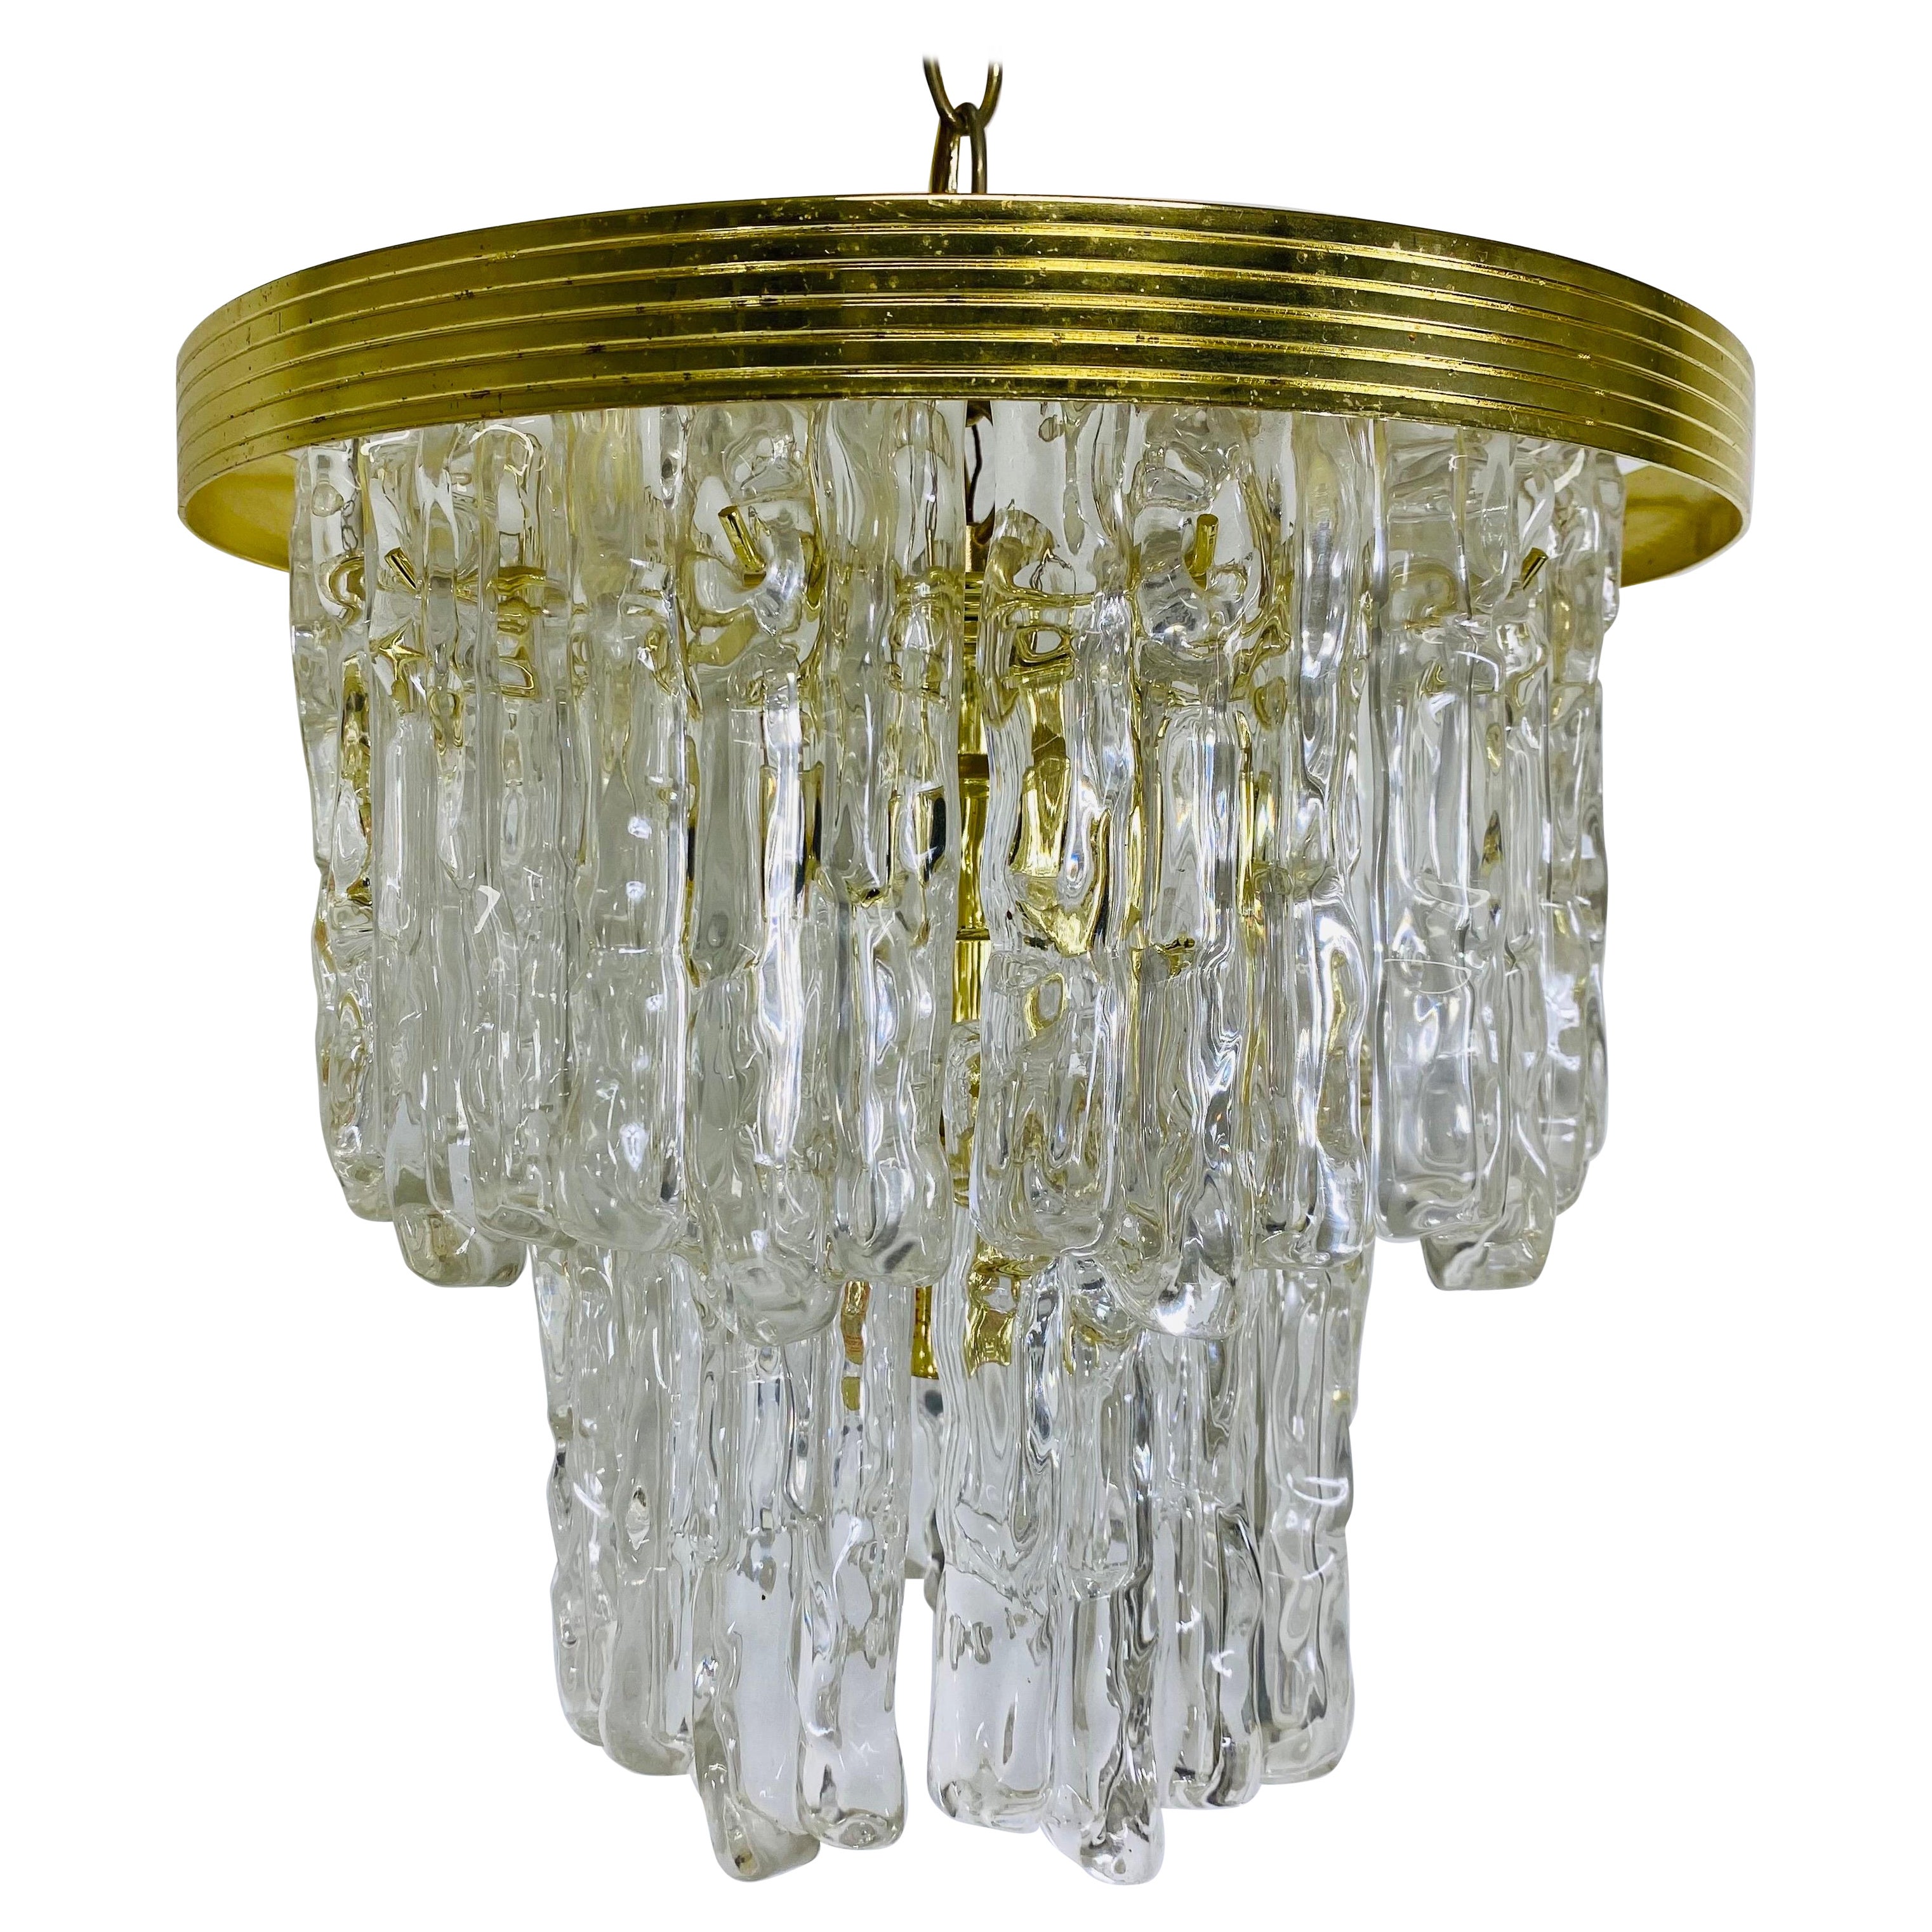 Vintage Mid-Century Modern Lucite and Brass Waterfall Style Chandelier For Sale